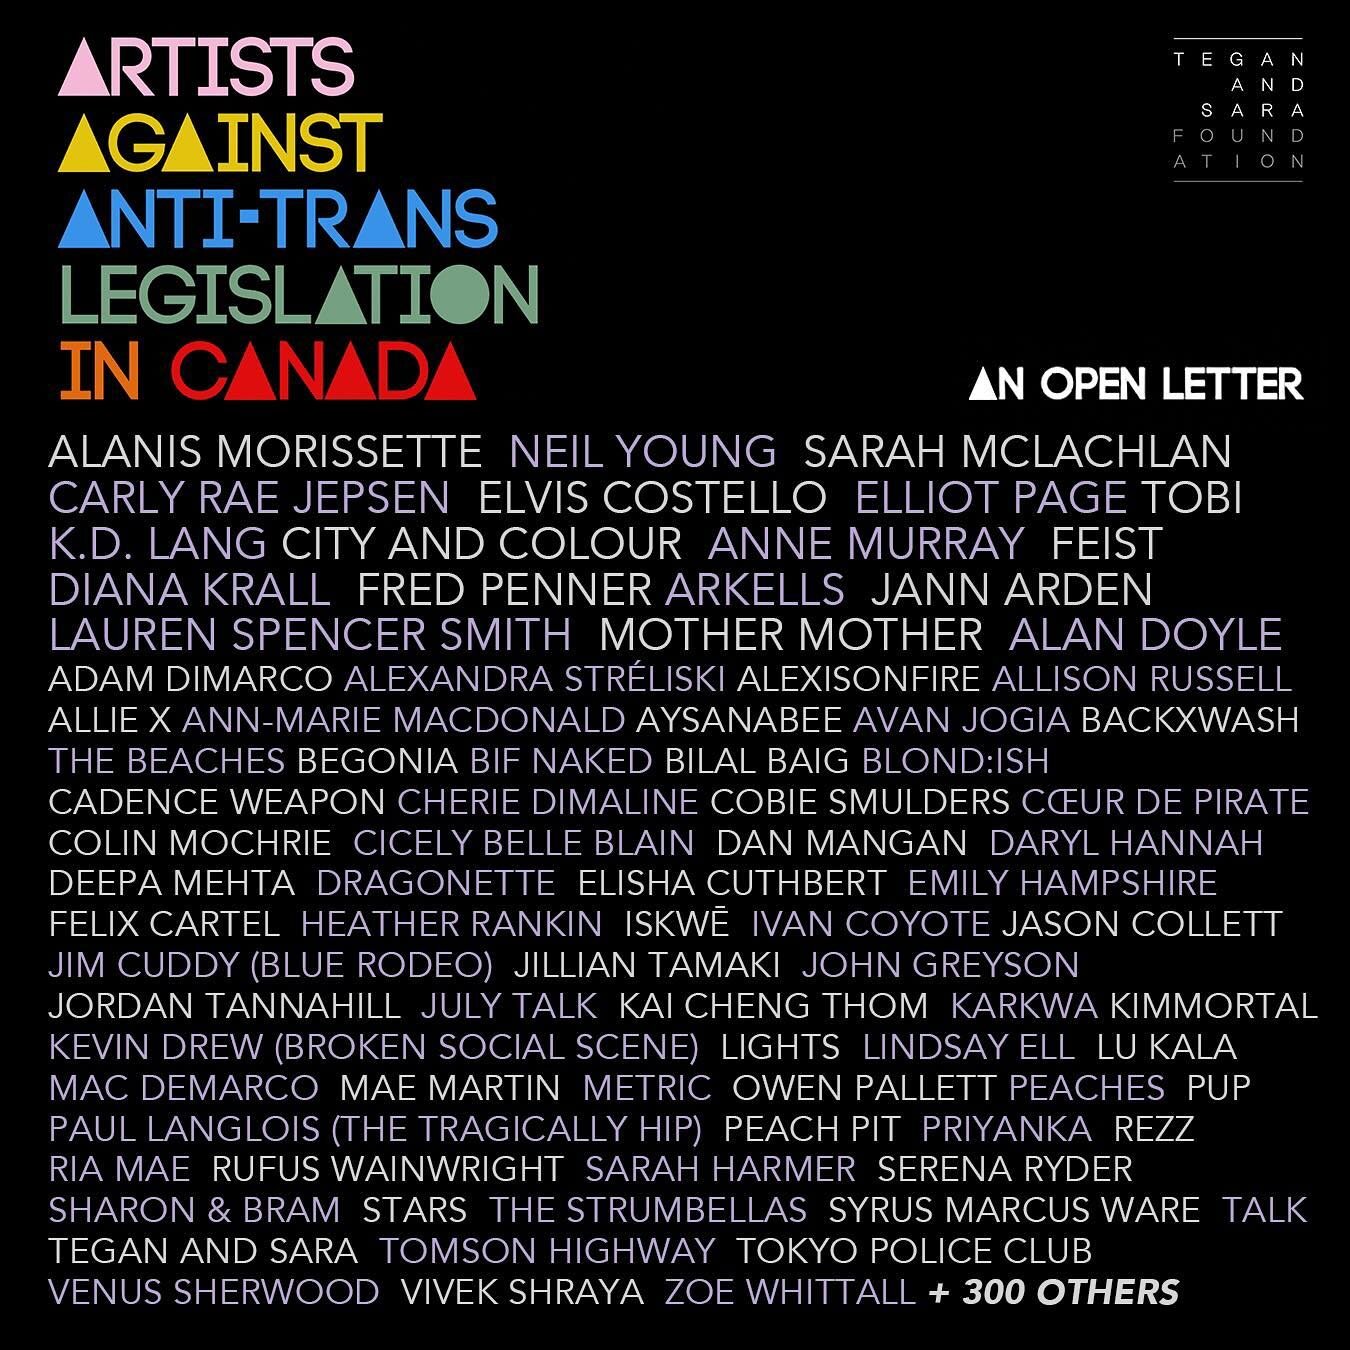 Uma Nota is proud to sign the @teganandsarafoundation&rsquo;s Open Letter: Artists Against Anti-Trans Legislation in Canada, bringing together Canadian artists standing against a concerning trend of legislation that puts the trans community of Canada